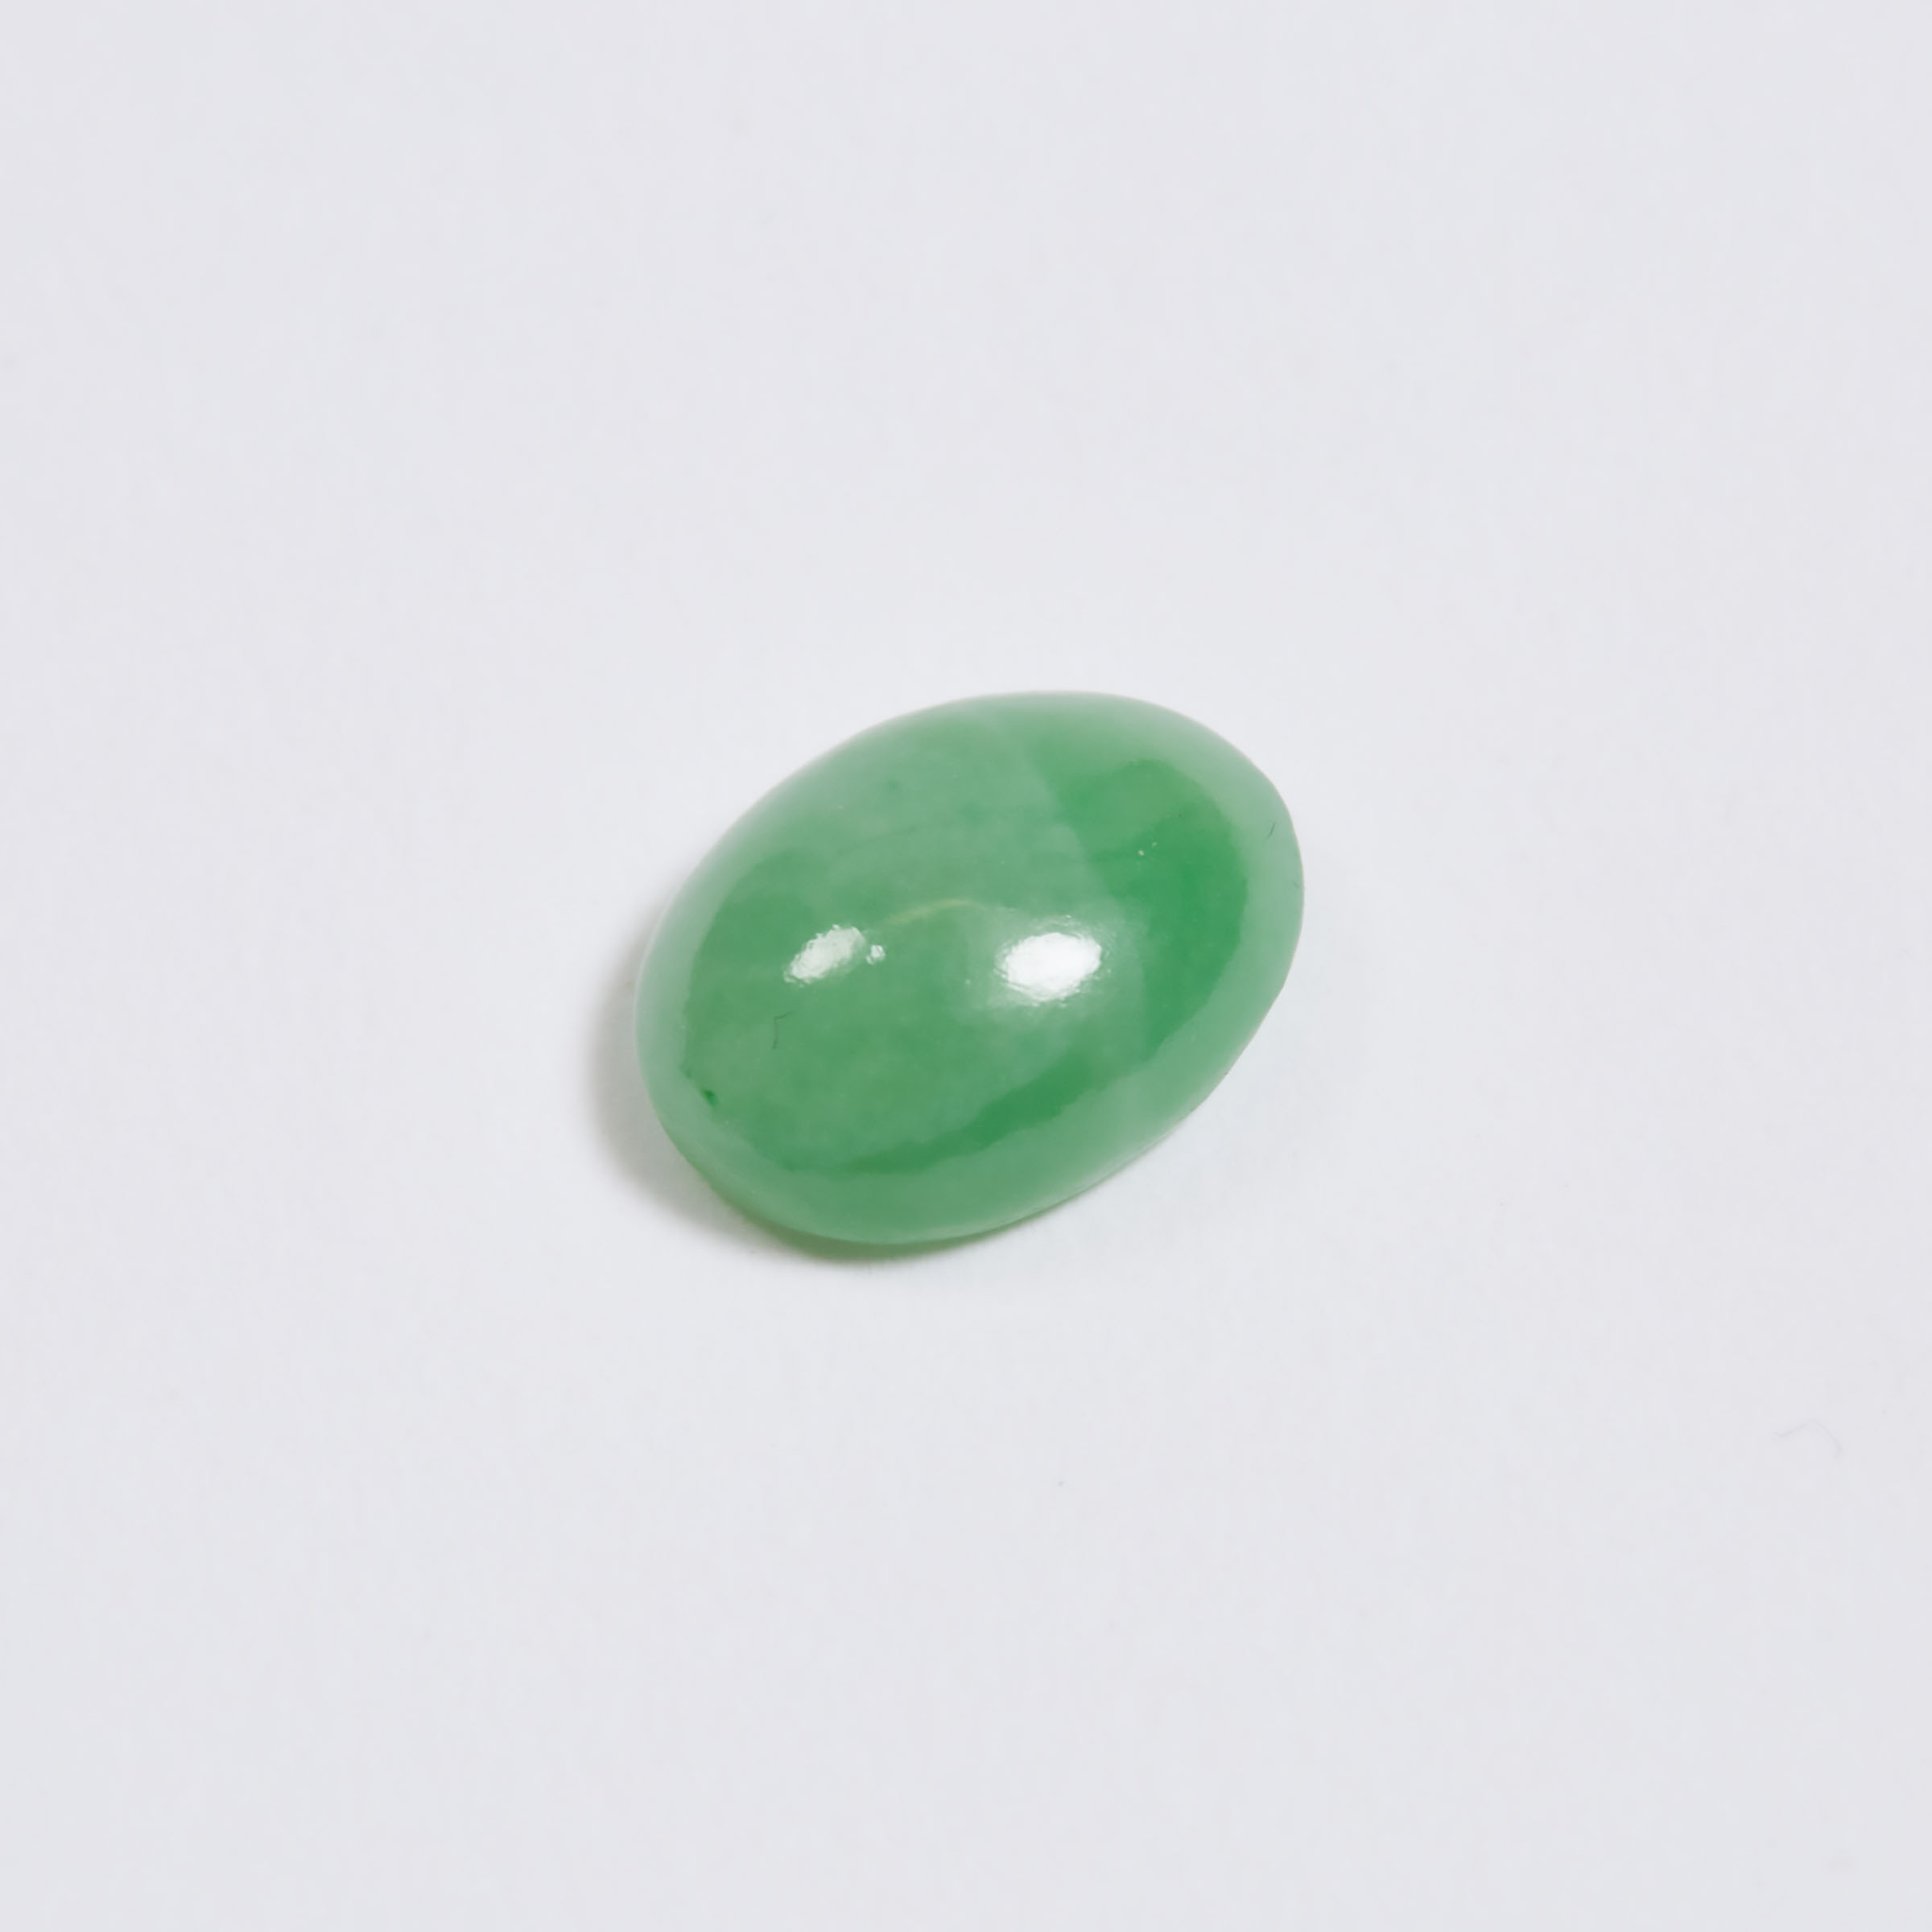 An Unmounted Natural Oval Jadeite